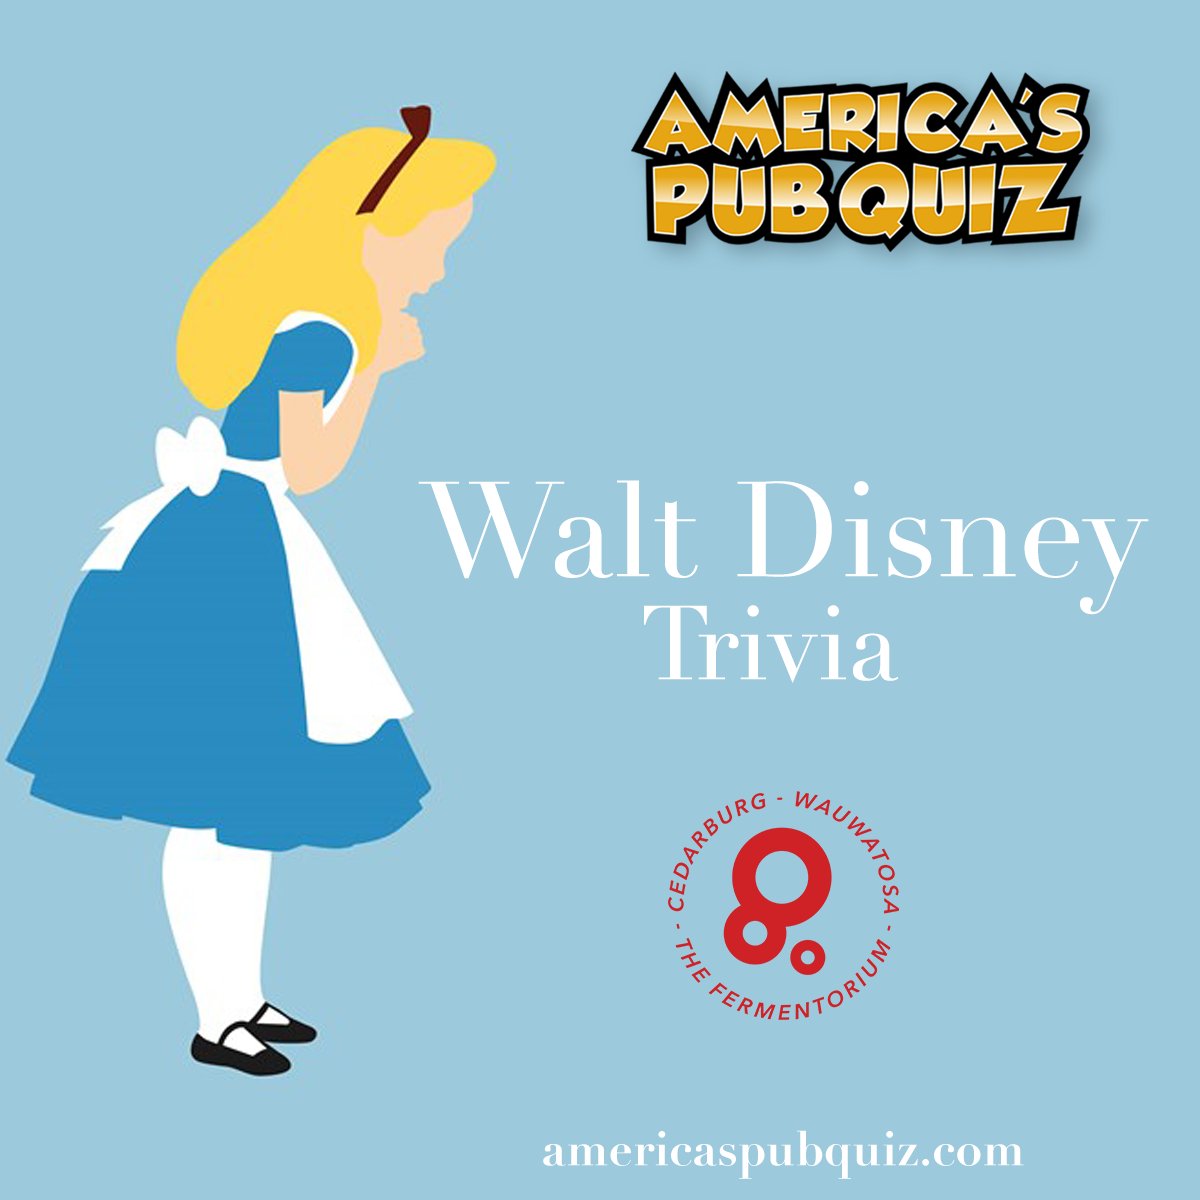 Do you know a Disney fan? Send them this post so that they can mark their calendars for Walt Disney Trivia at our Cedarburg Tasting Room on Wednesday, September 28th at 7PM. #trivia #disneythemed #americaspubquiz #drinklocal #pubquiz #thefermentorium